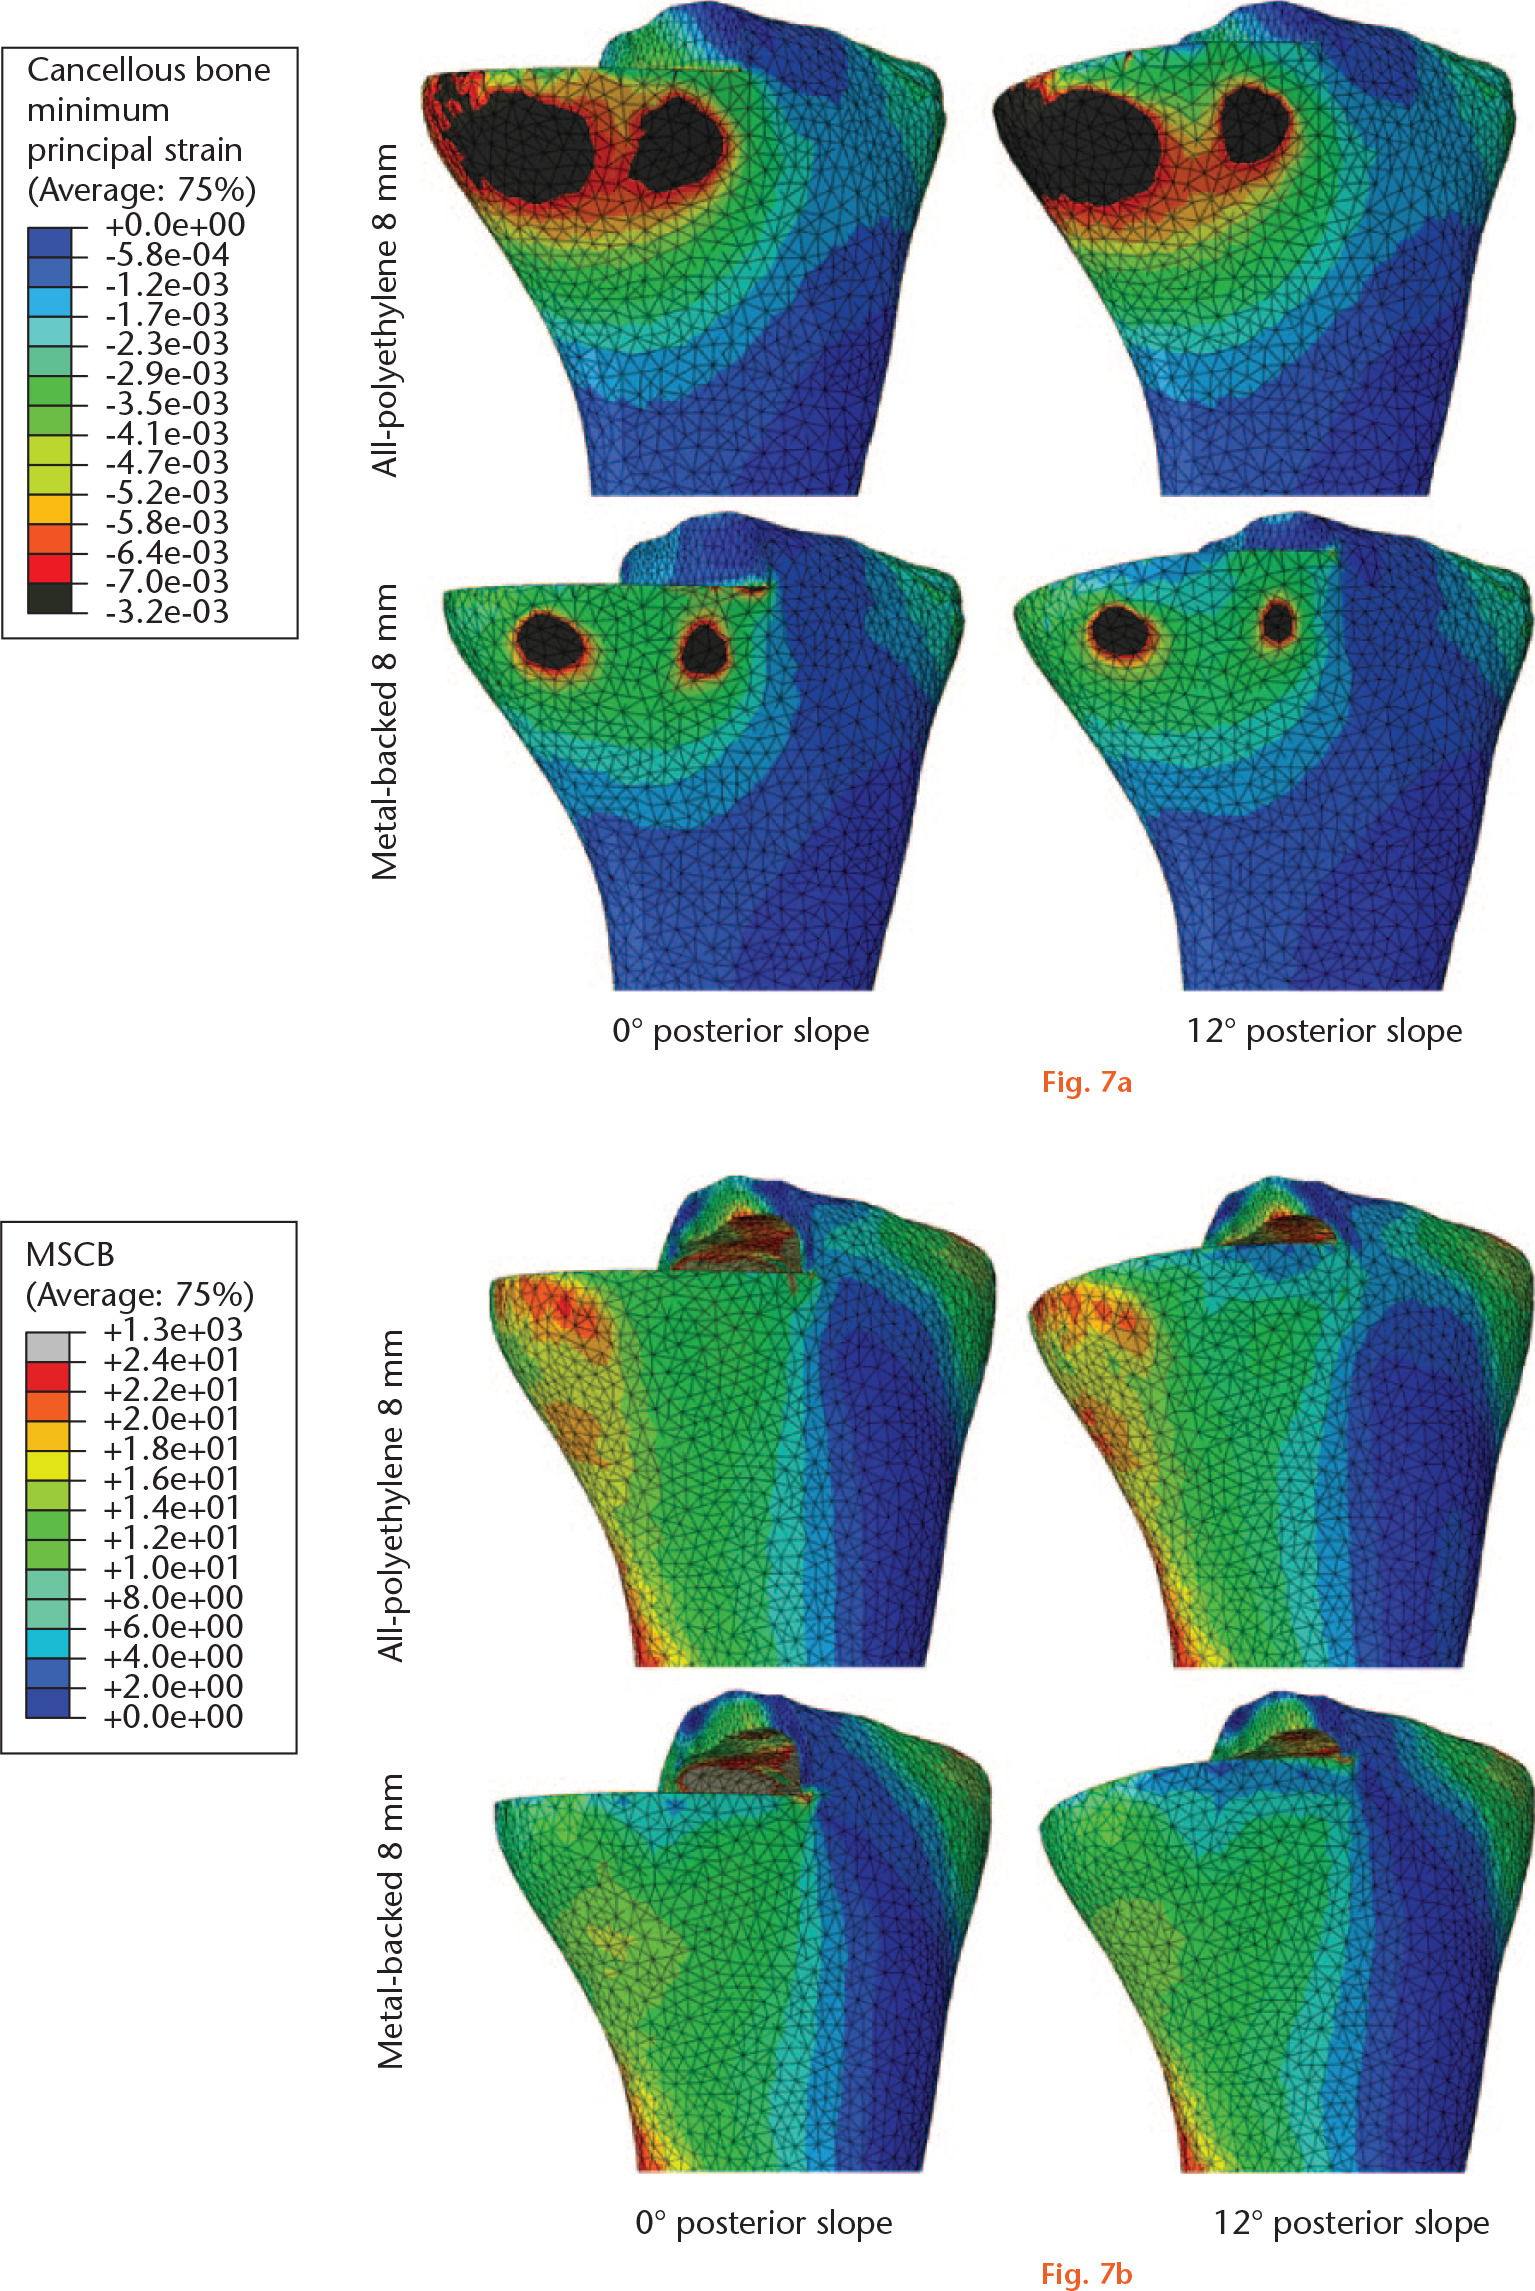  
            a) Cancellous bone minimum principal strain and b) von Mises stress in cortical bone (MSCB) contours for all-polyethylene and metal-backed implants in different sagittal alignments.
          